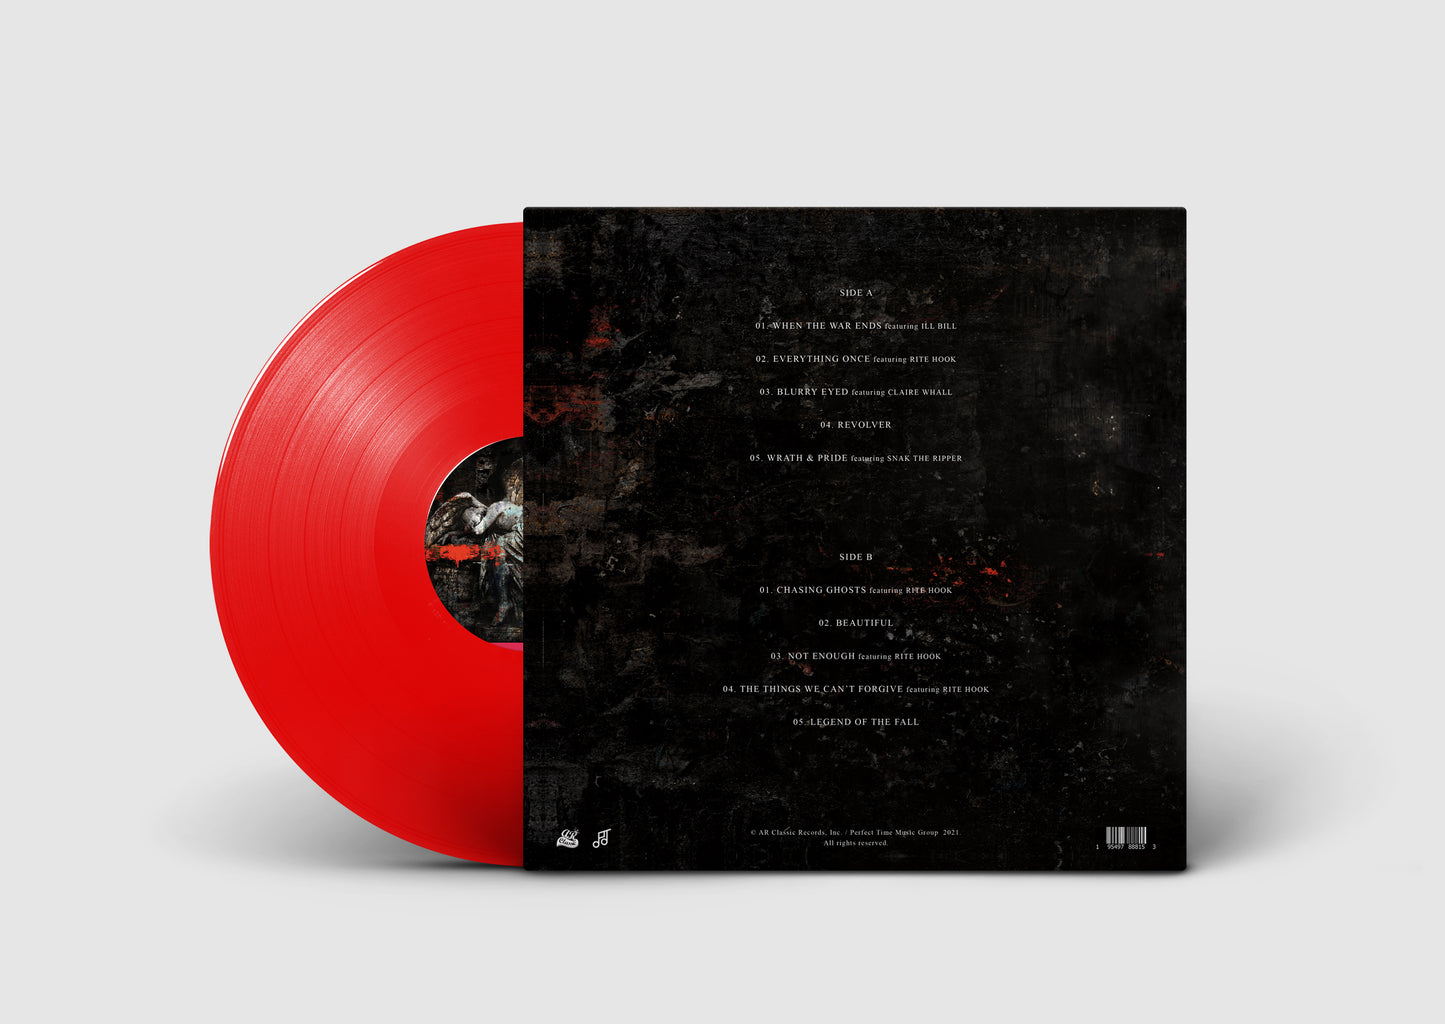 Slaine – The Things We Can't Forgive Vinyl